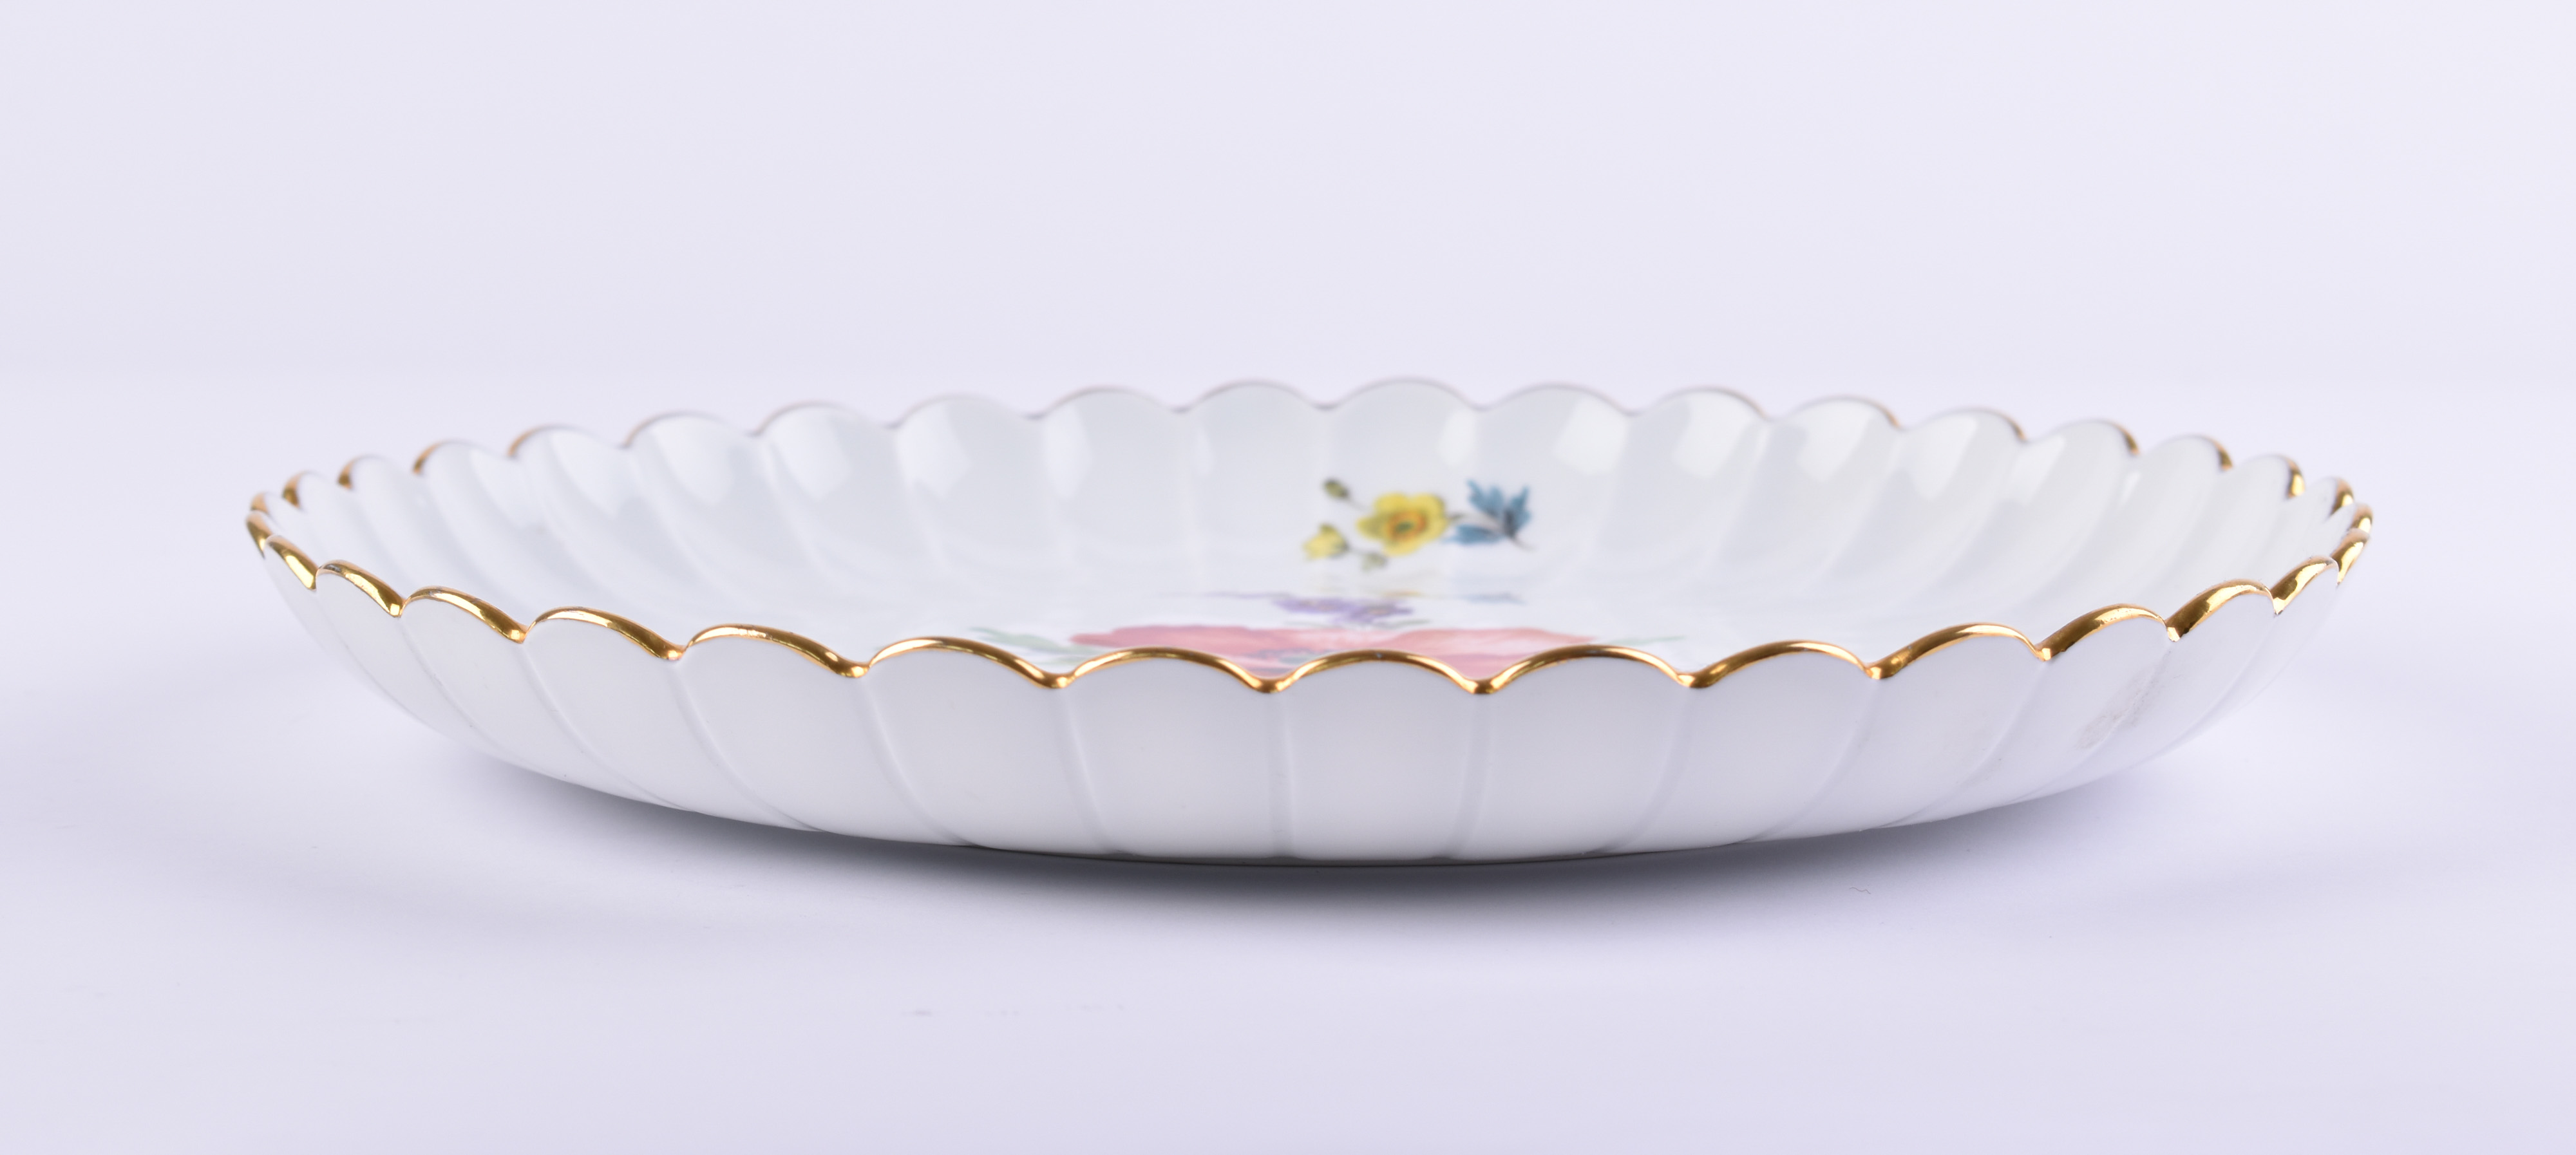  Cake plate Meissen - Image 3 of 4